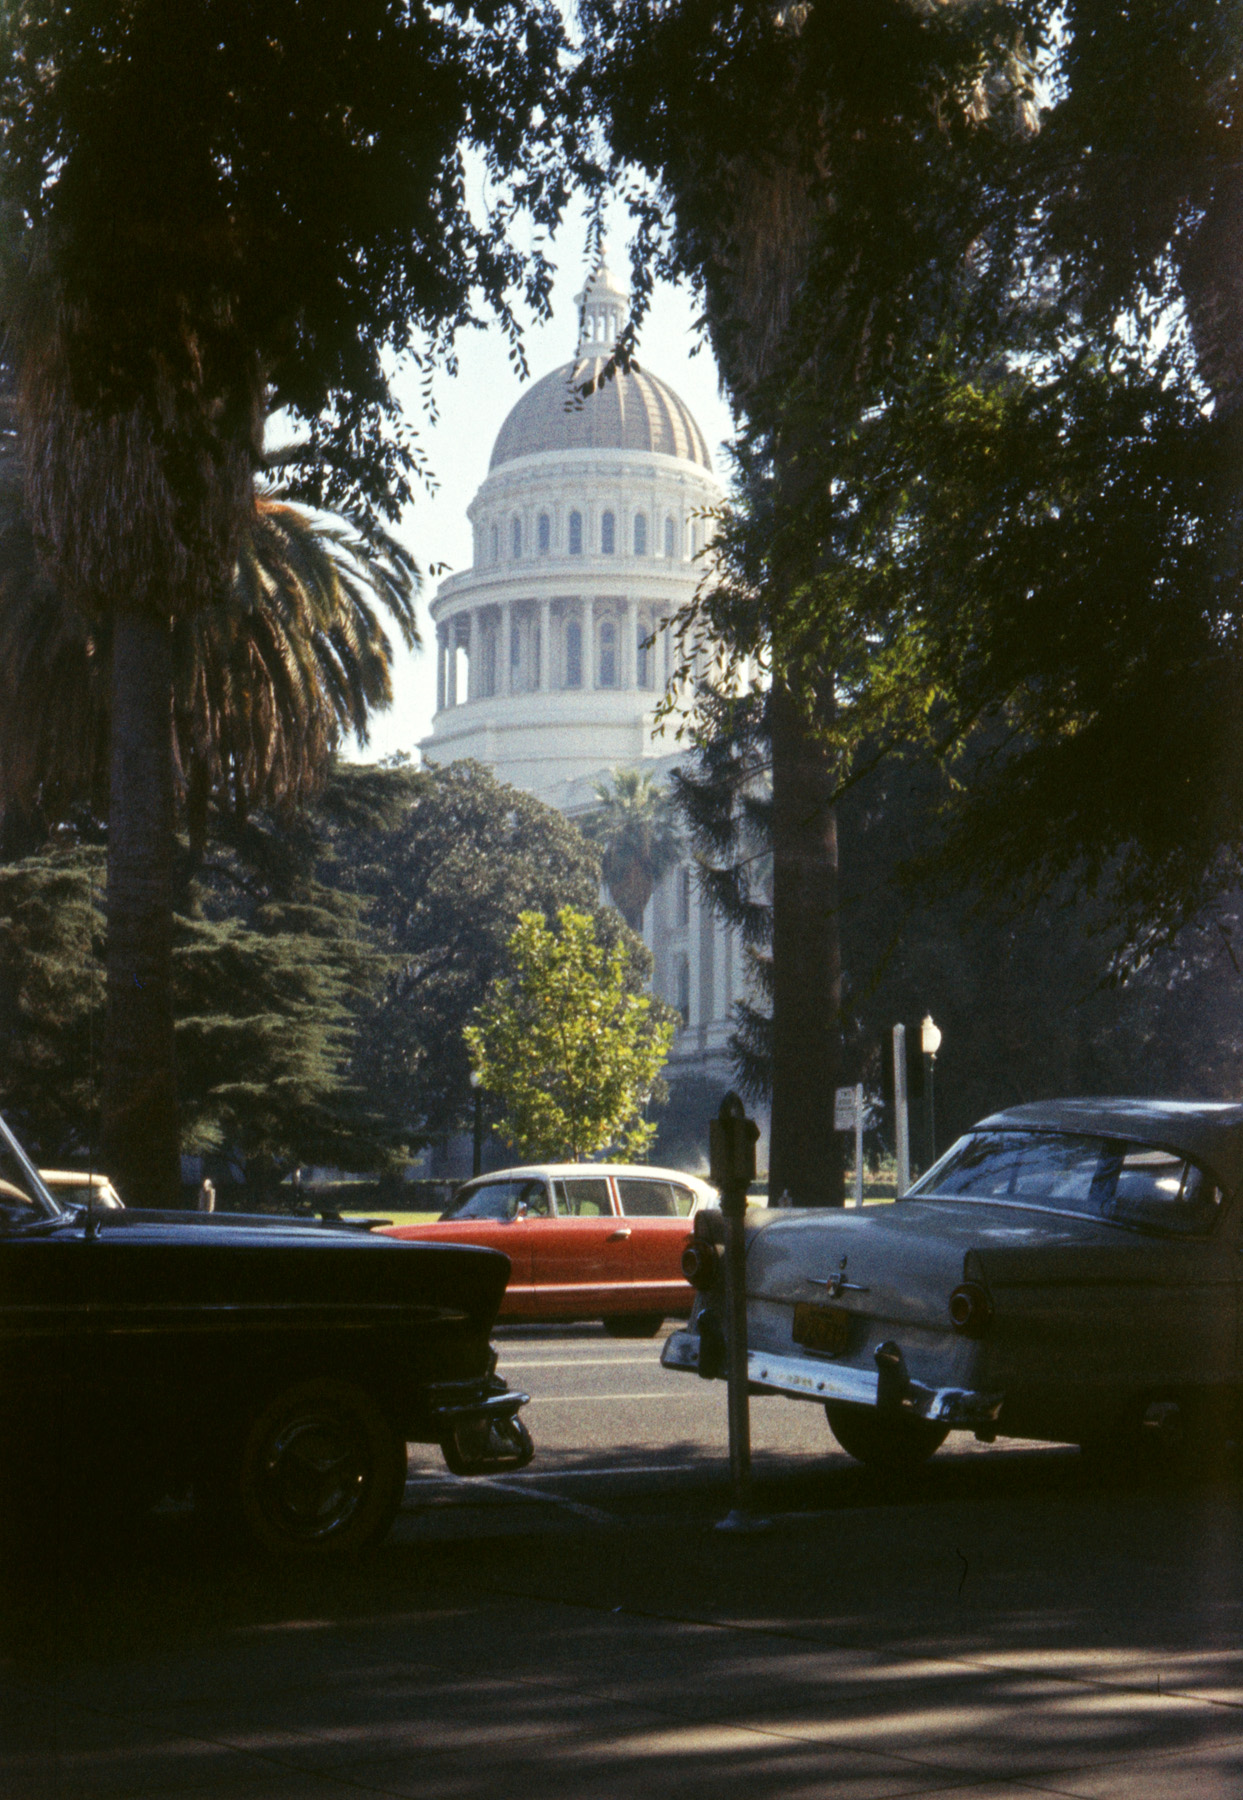 While I didn't take this photo of the California State Capitol - my brother did on 35mm Anscochrome - I am the reason it exists. At 11 years of age I was an avid rockhound and longed to find things like quartz crystals or what was for me the holy grail: a geode. What I lacked was field experience, so I wheedled my father into driving up from Marin County to the American River in the Sierra foothills east of Sacramento. My brother came along for the ride. History does not record, nor did my brother, anything that might have happened past Sacramento. If I'd found crystals or a geode, I'd have remembered. But today I have one consolation: my brother fortuitously captured a Nash in its natural habitat, the roadways of the 1950s. View full size.